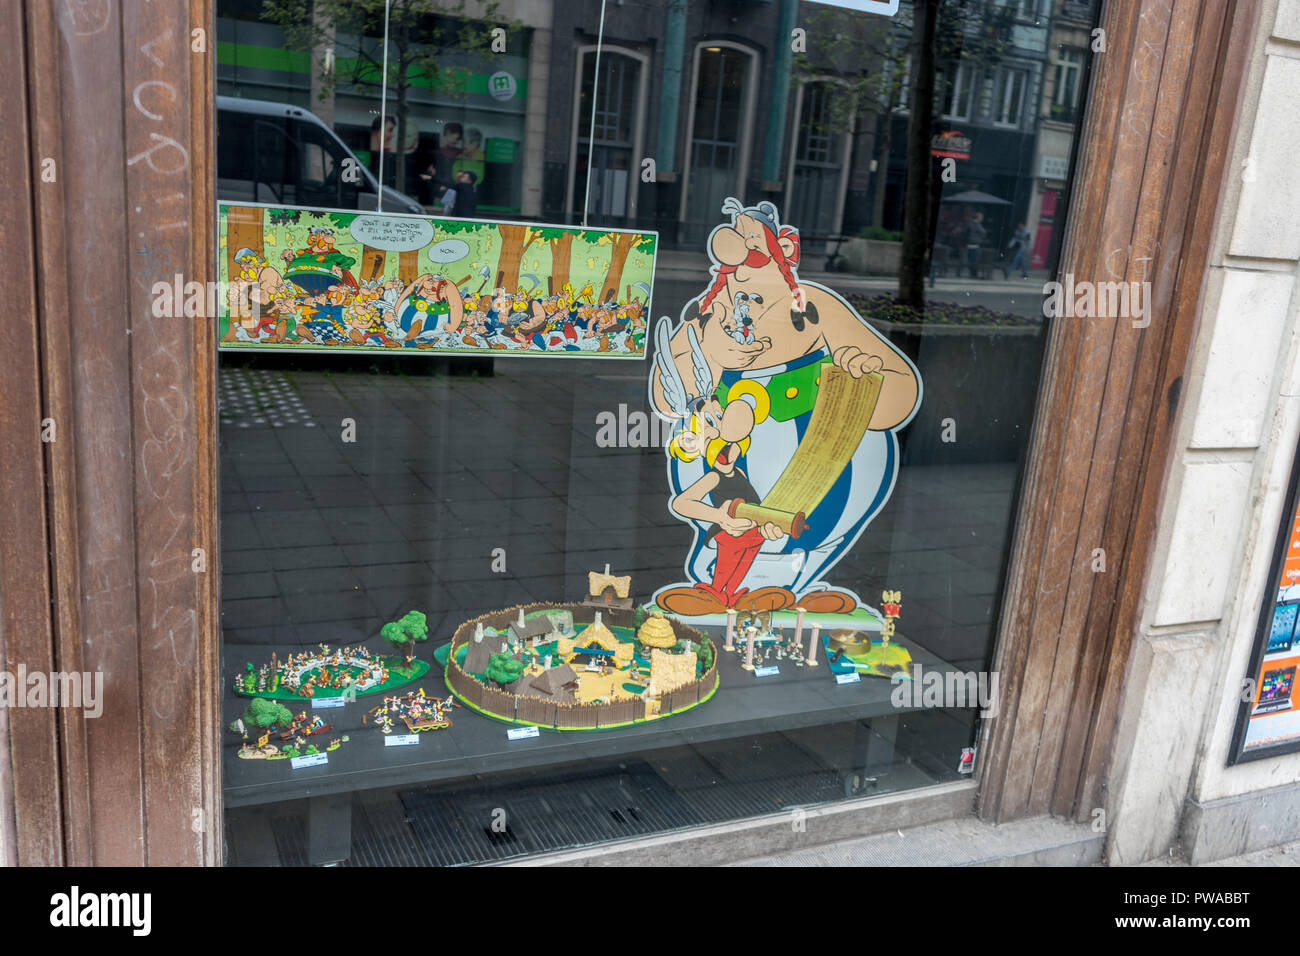 Brussels, Belgium - April 14 : Photo of Asterix and Obelix displayed in a shop window on april 14 in Brussels, Belgium. Stock Photo